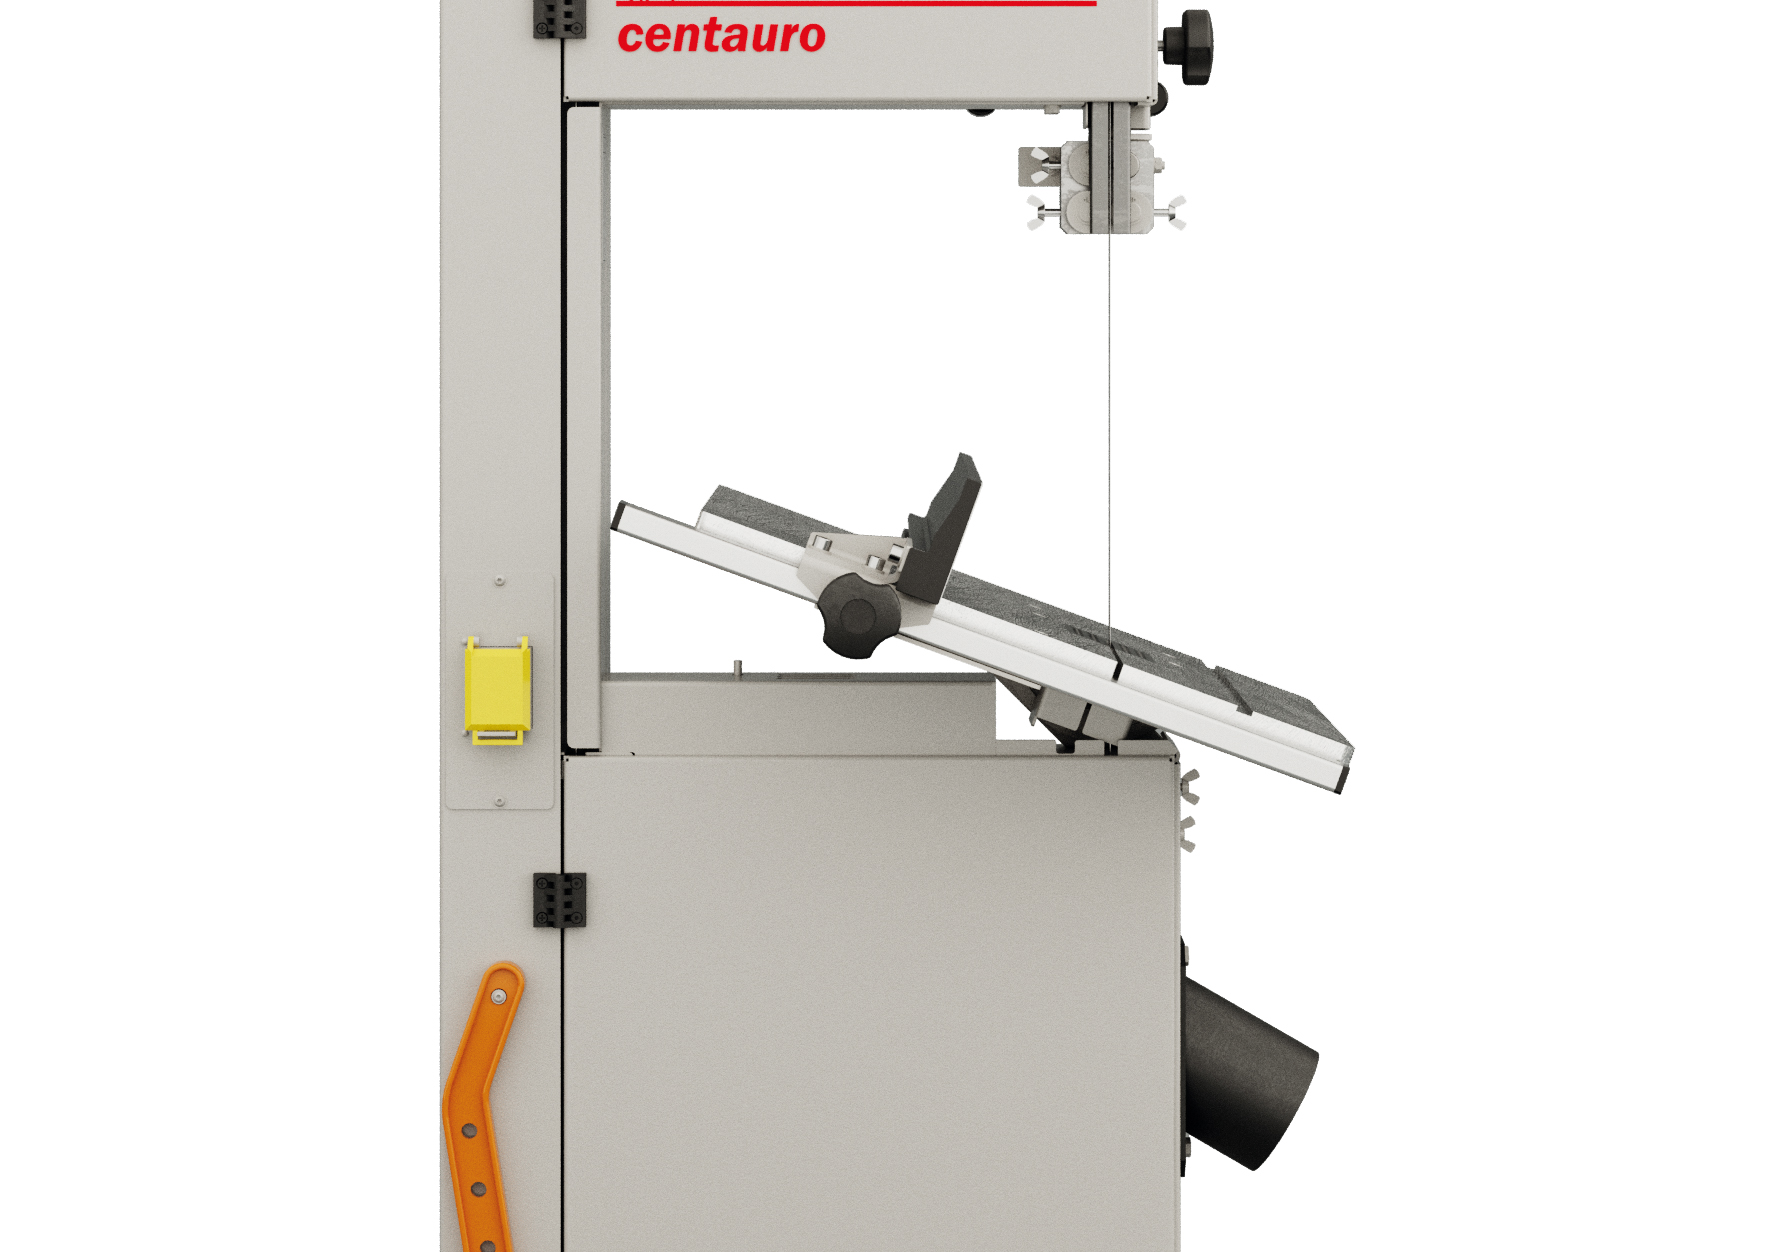 DYI and small carpentries bandsaw - Centauro